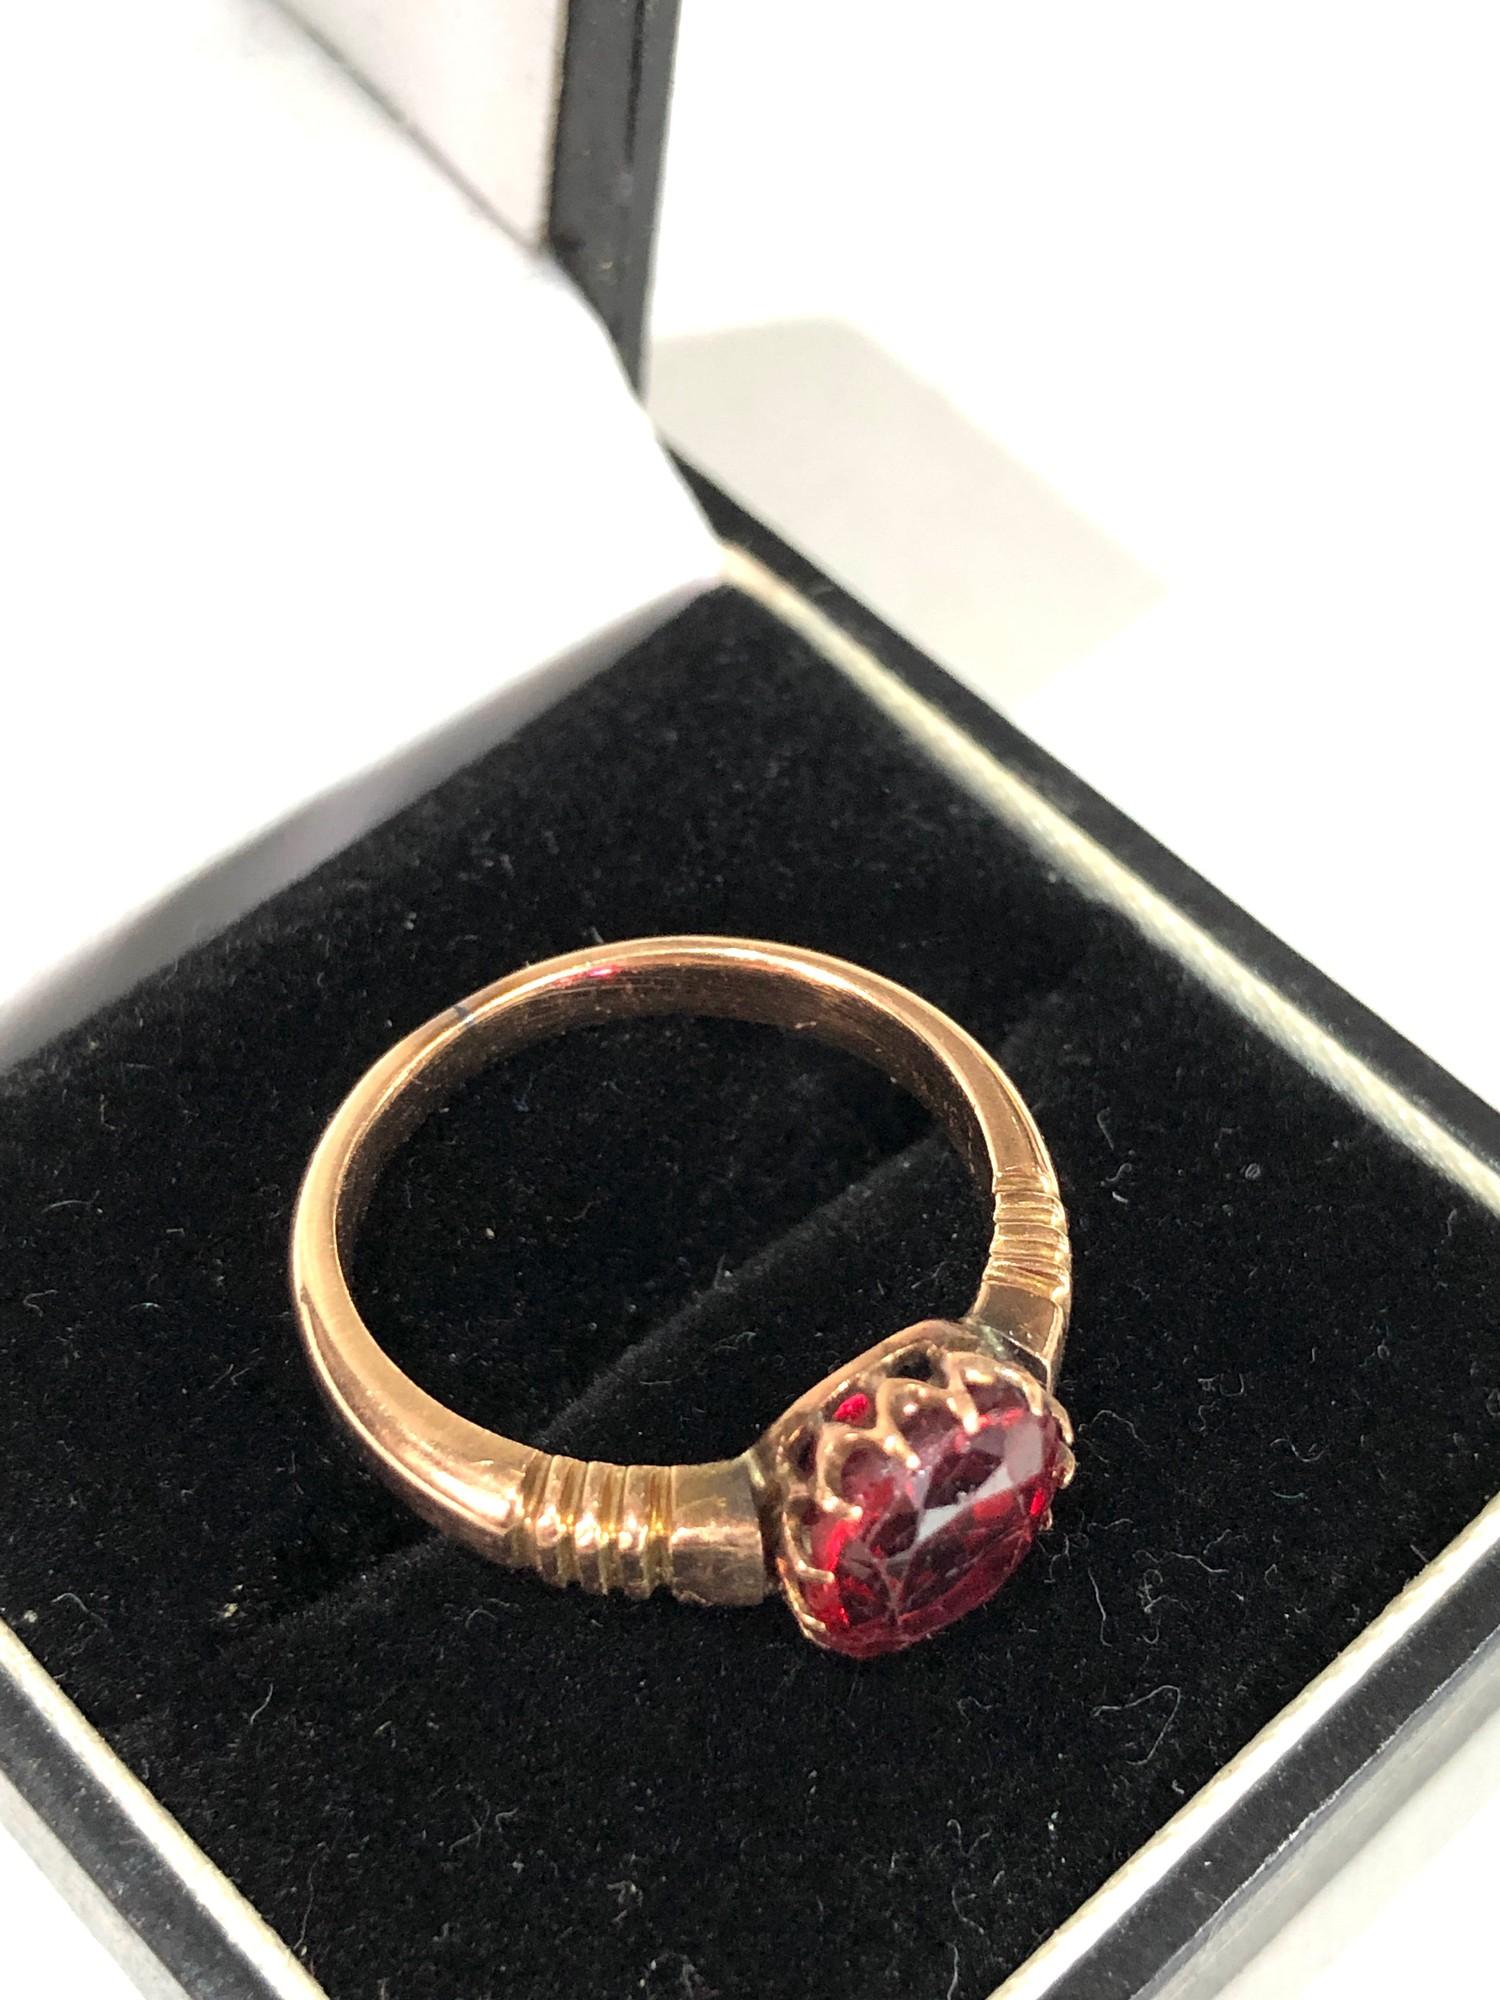 9ct gold garnet antique ring weight 4.2g - Image 3 of 4